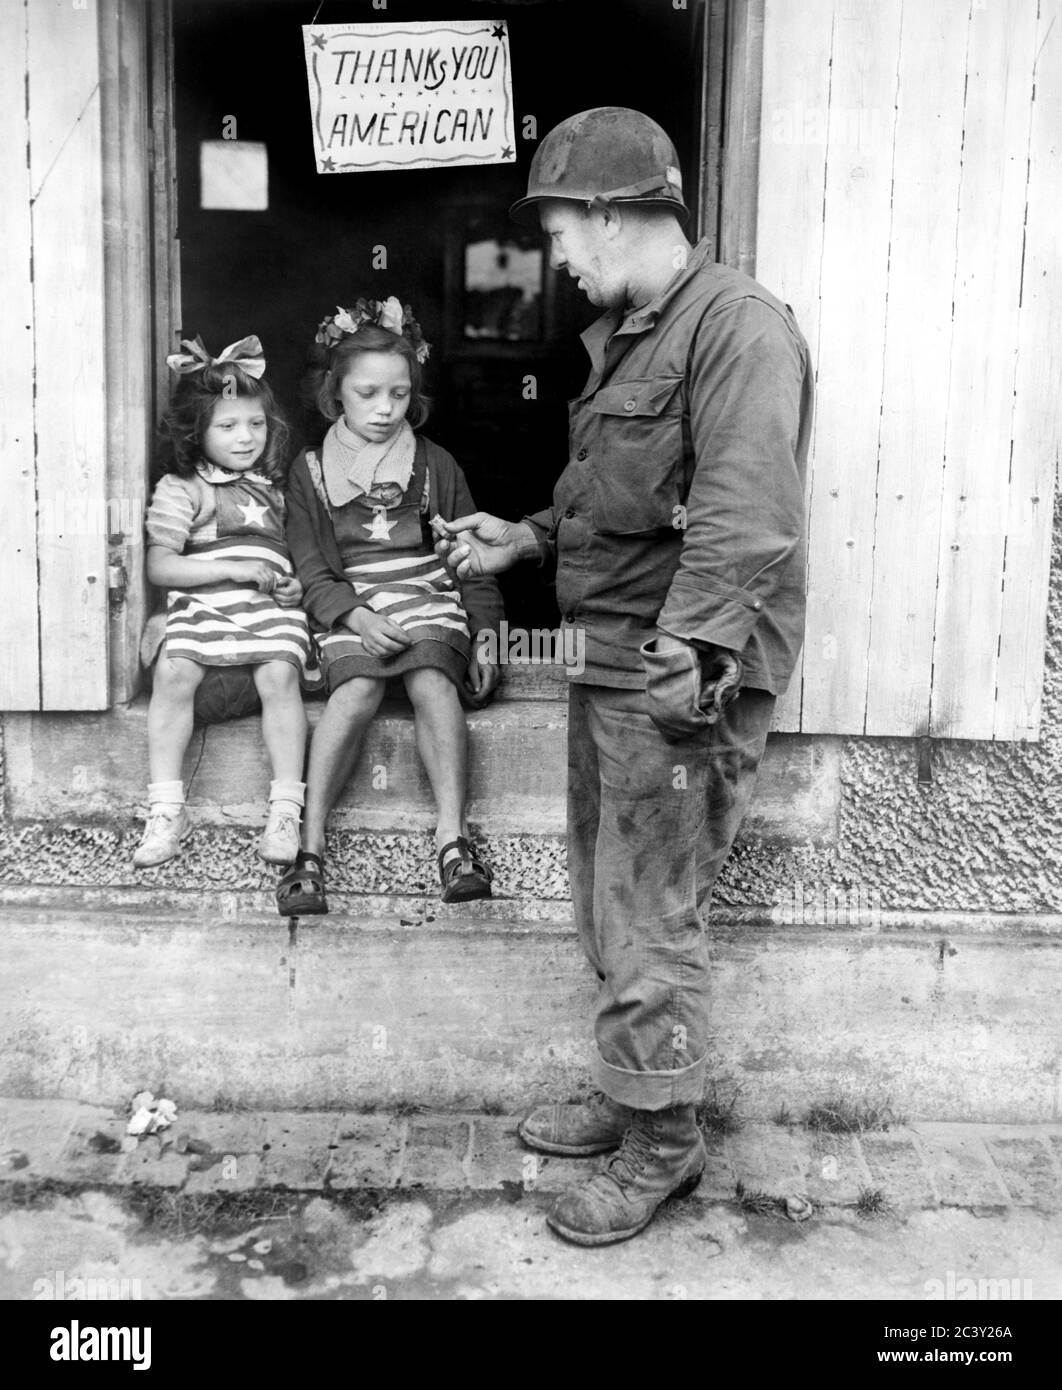 Sgt. Walter P. Goworek, Jersey City, N.J., treating two little French Girls with Candy, France, U.S. Army Signal Corps, July 4, 1944 Stock Photo